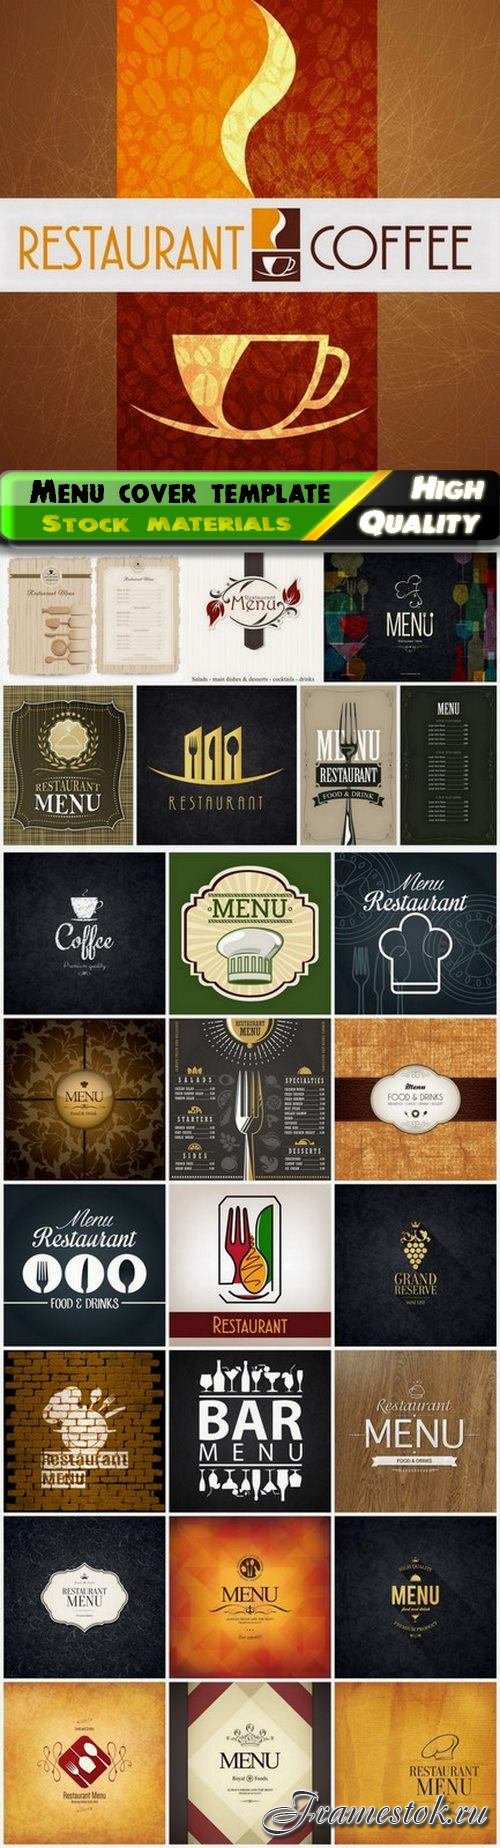 Menu cover template for restaurant or cafe - 25 Eps